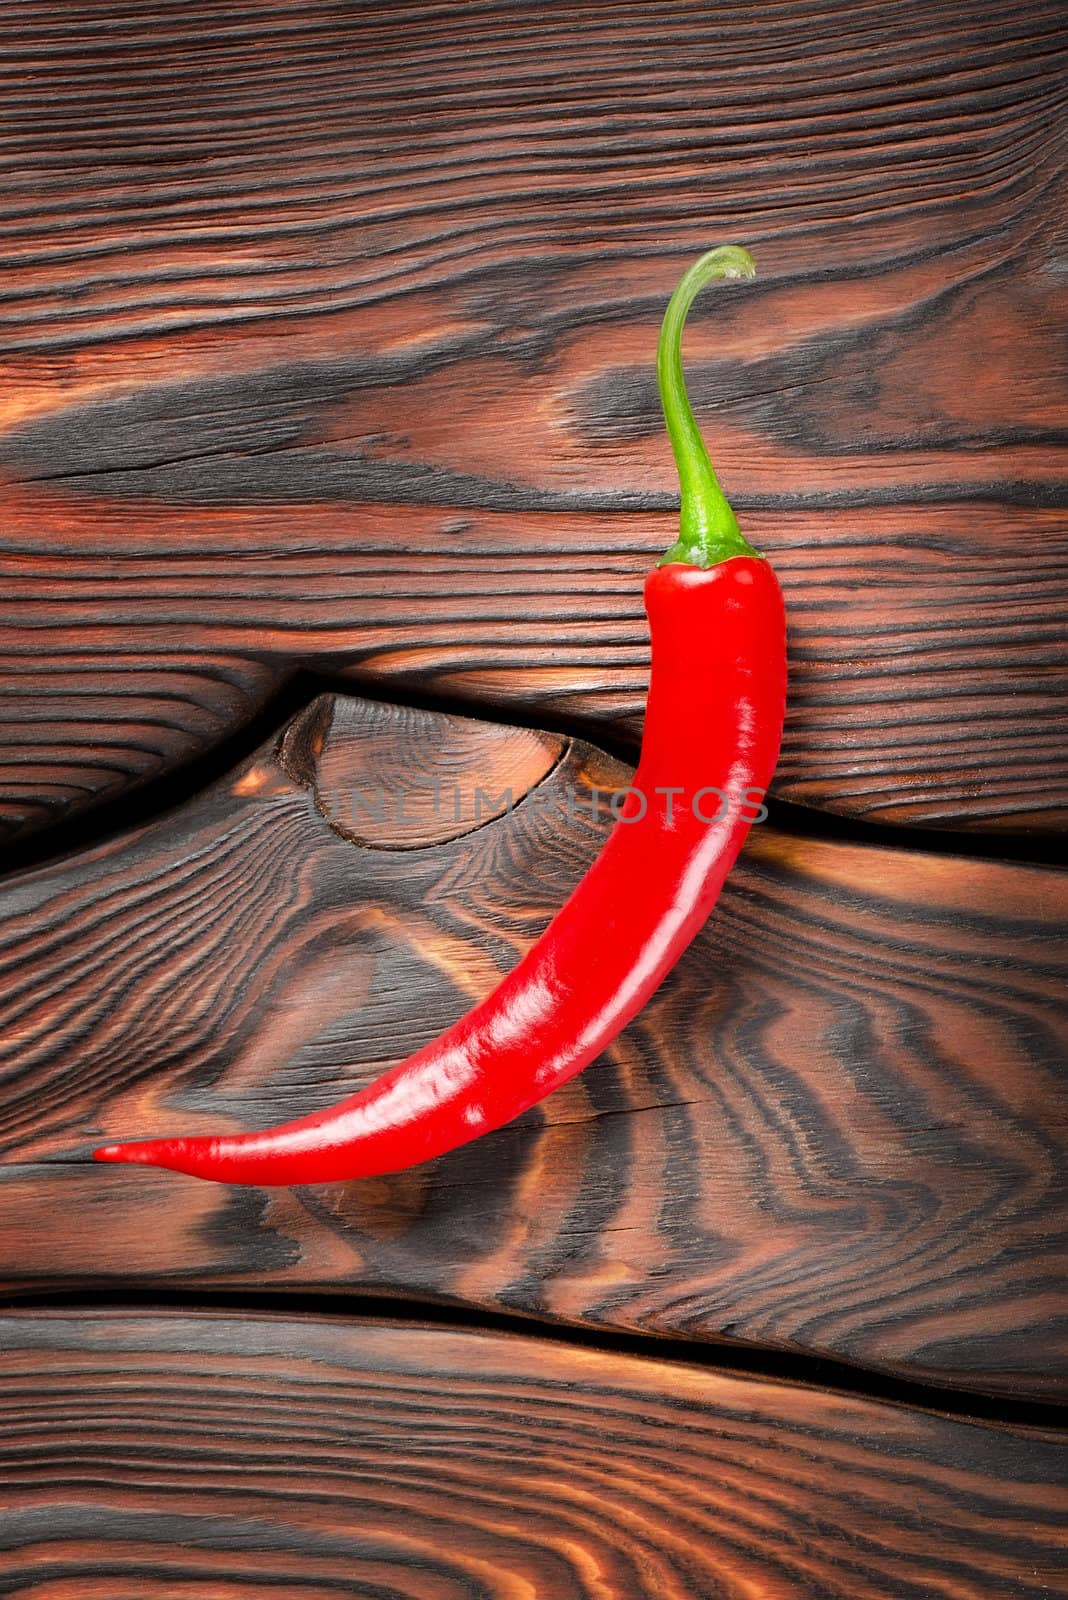 Red chili pepper on a wooden background